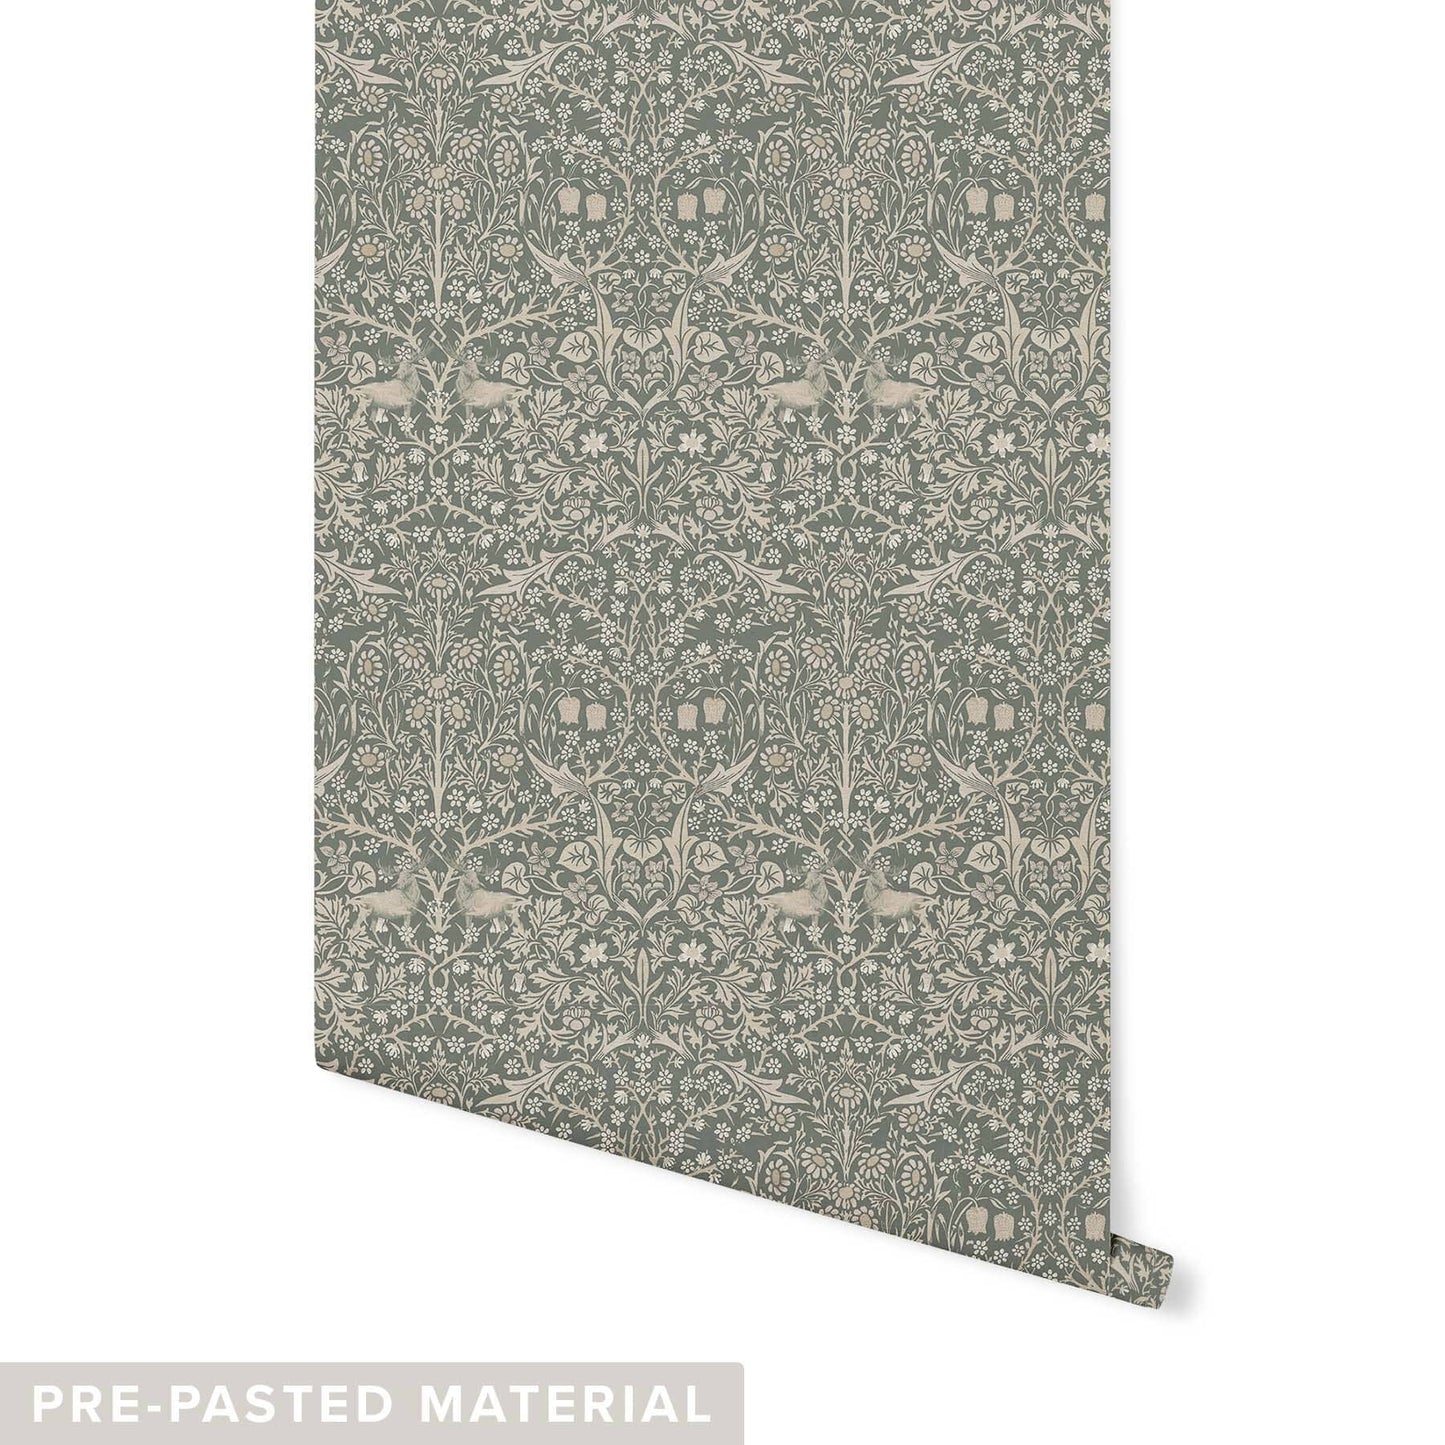 Northern Expedition Wallpaper Wallpaper Mia Parres Pre-pasted Mineral Green DOUBLE ROLL : 46" X 4 FEET